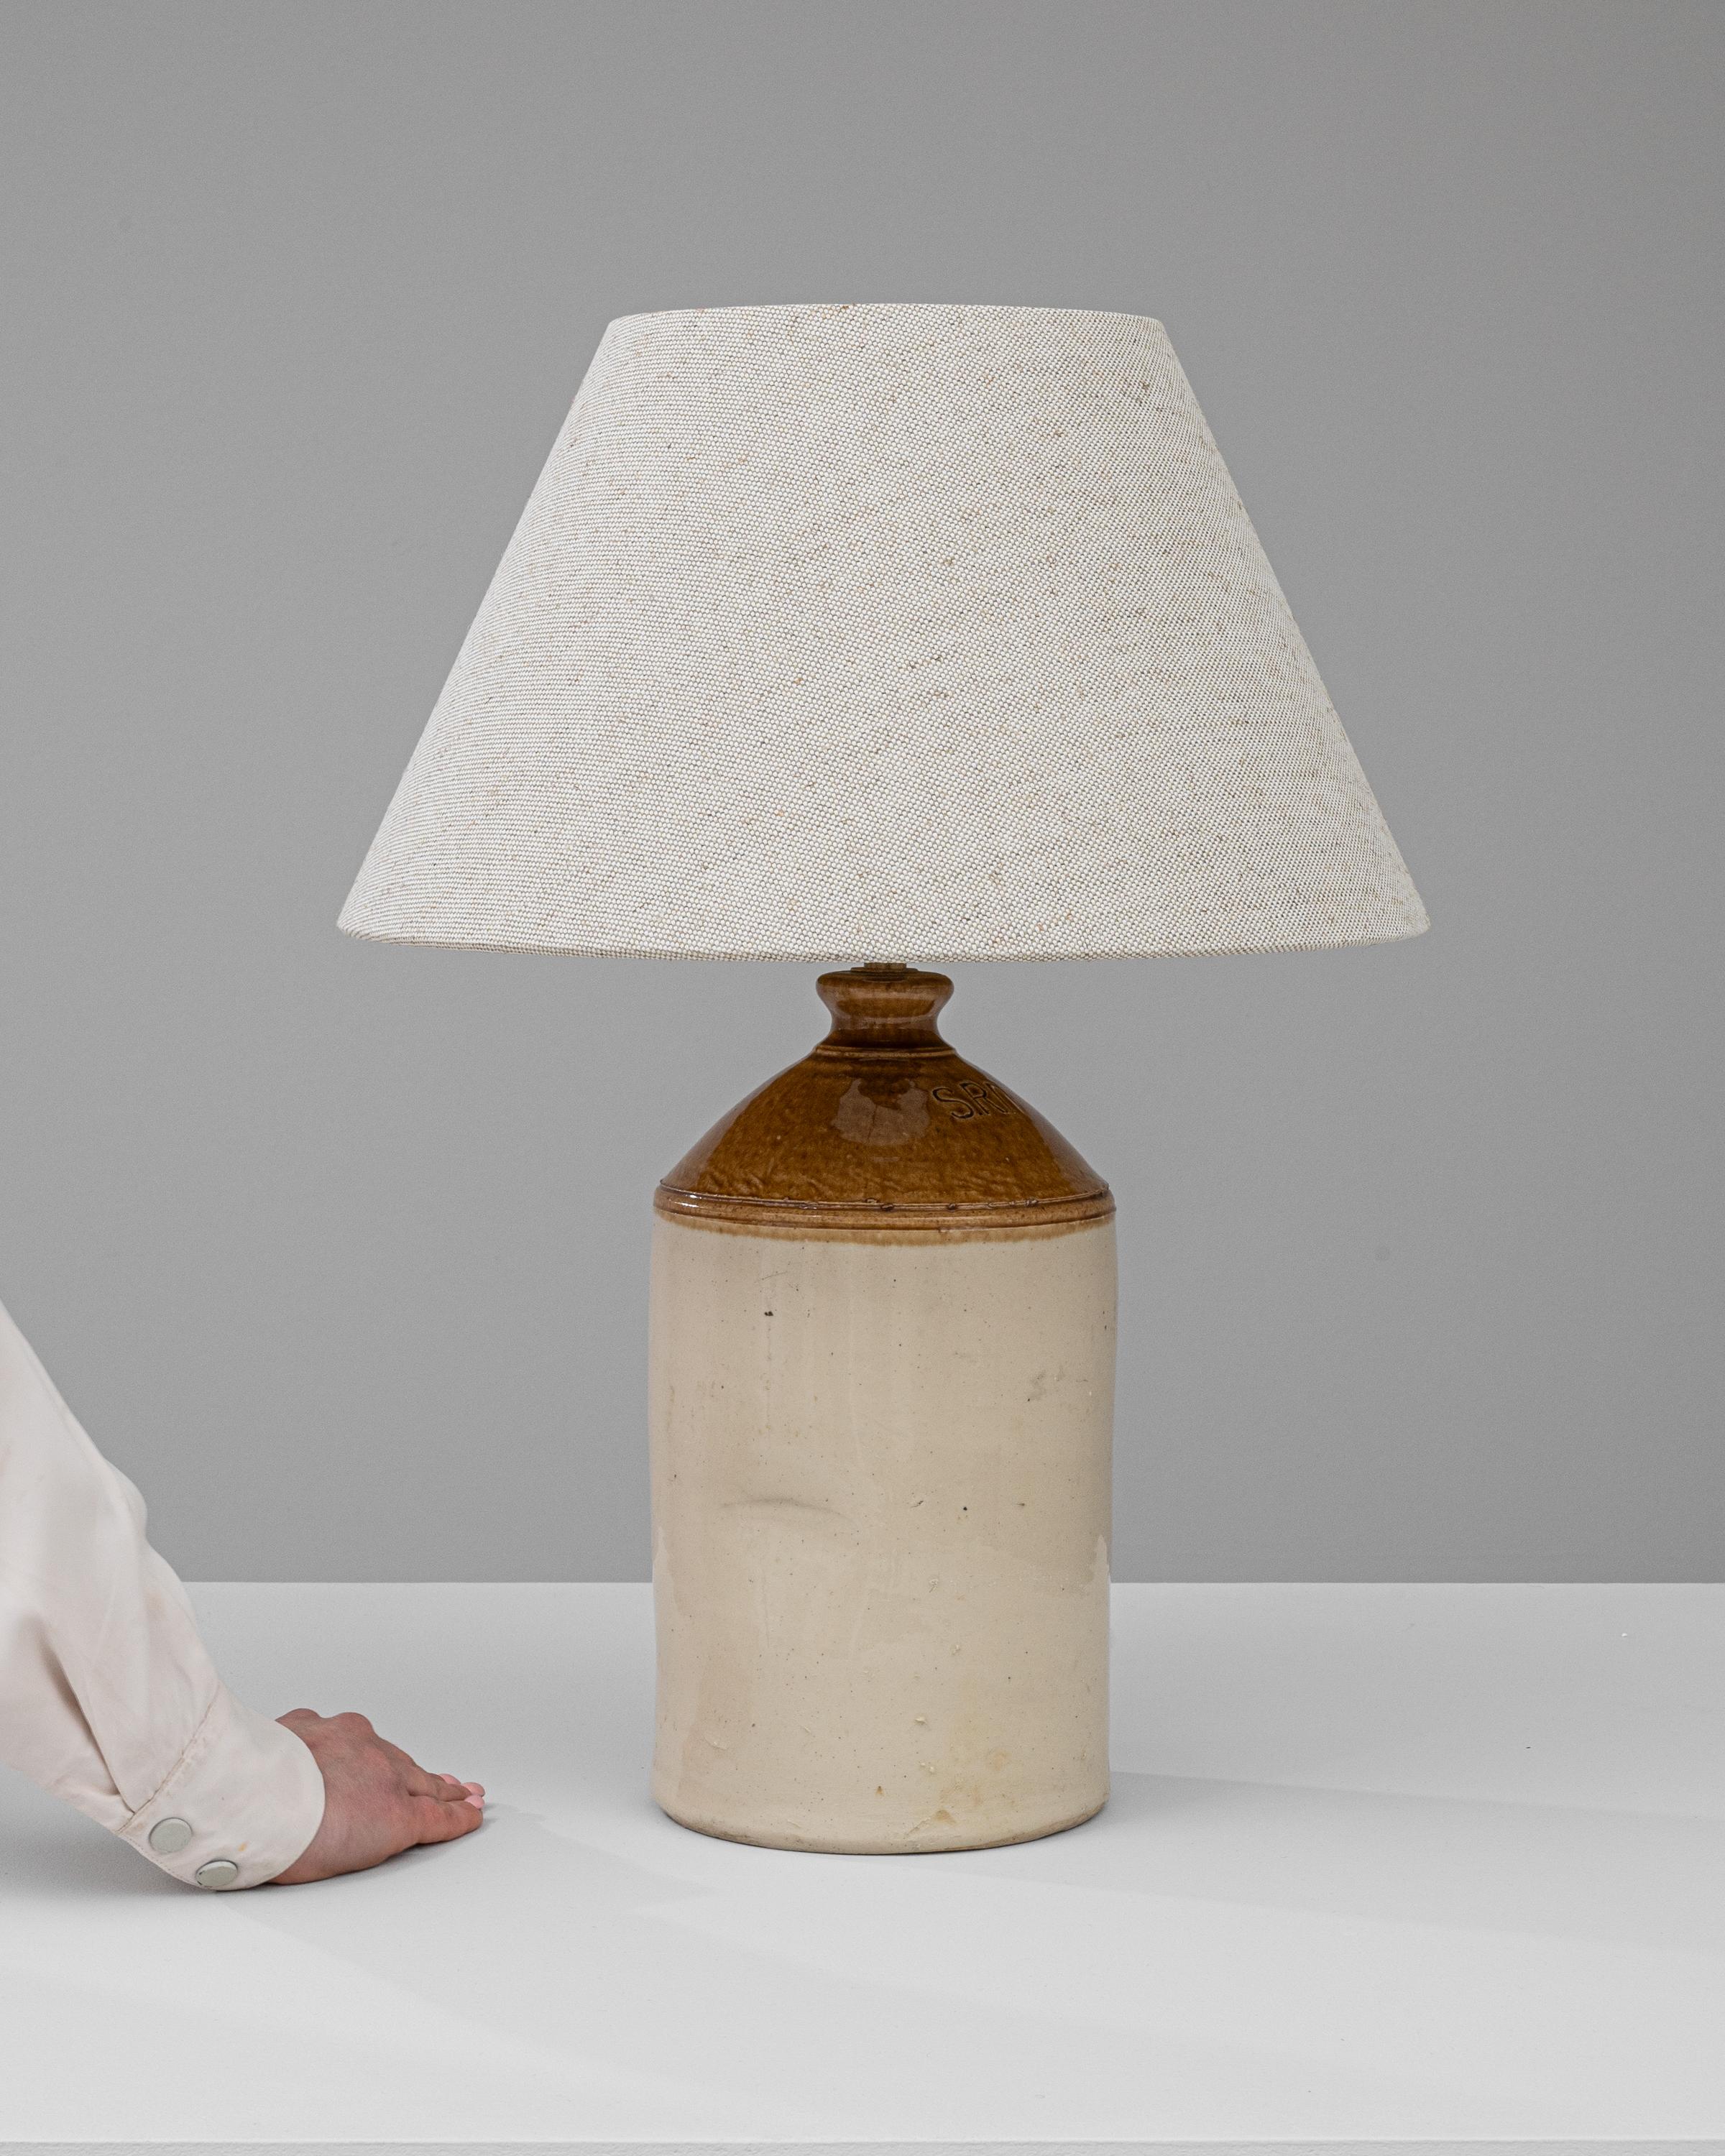 Discover the charm of the past with this Early 20th Century British Ceramic Table Lamp. Crafted with the finesse of yesteryear's artisans, this lamp boasts a sturdy, two-tone ceramic base that evokes the rich, earthen tones of the English